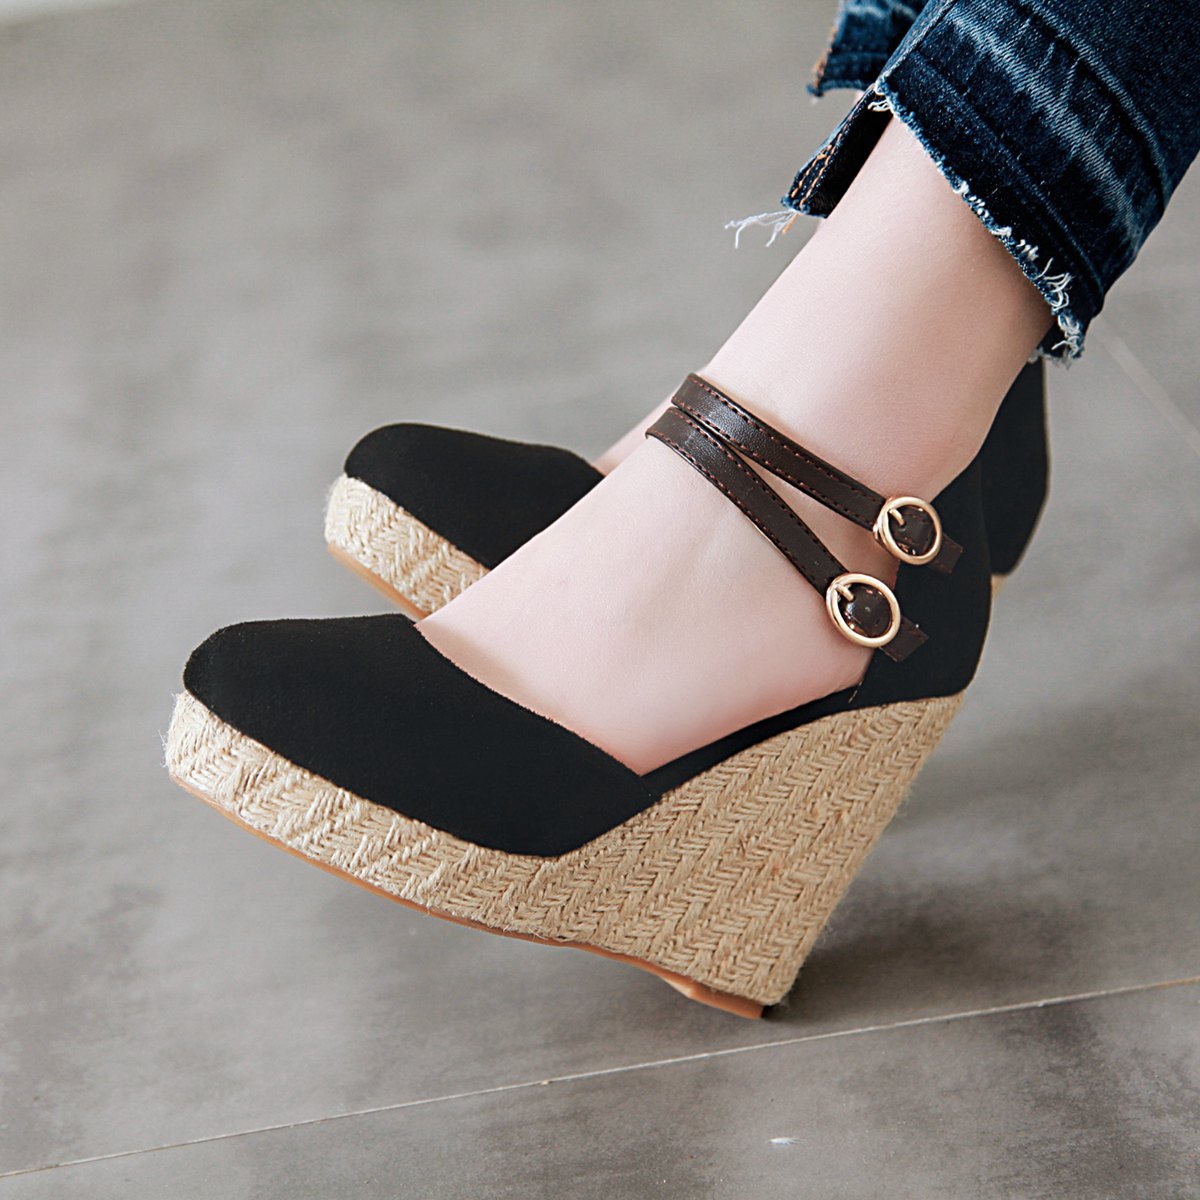 Women's closed toe ankle strap wedge heels sandals